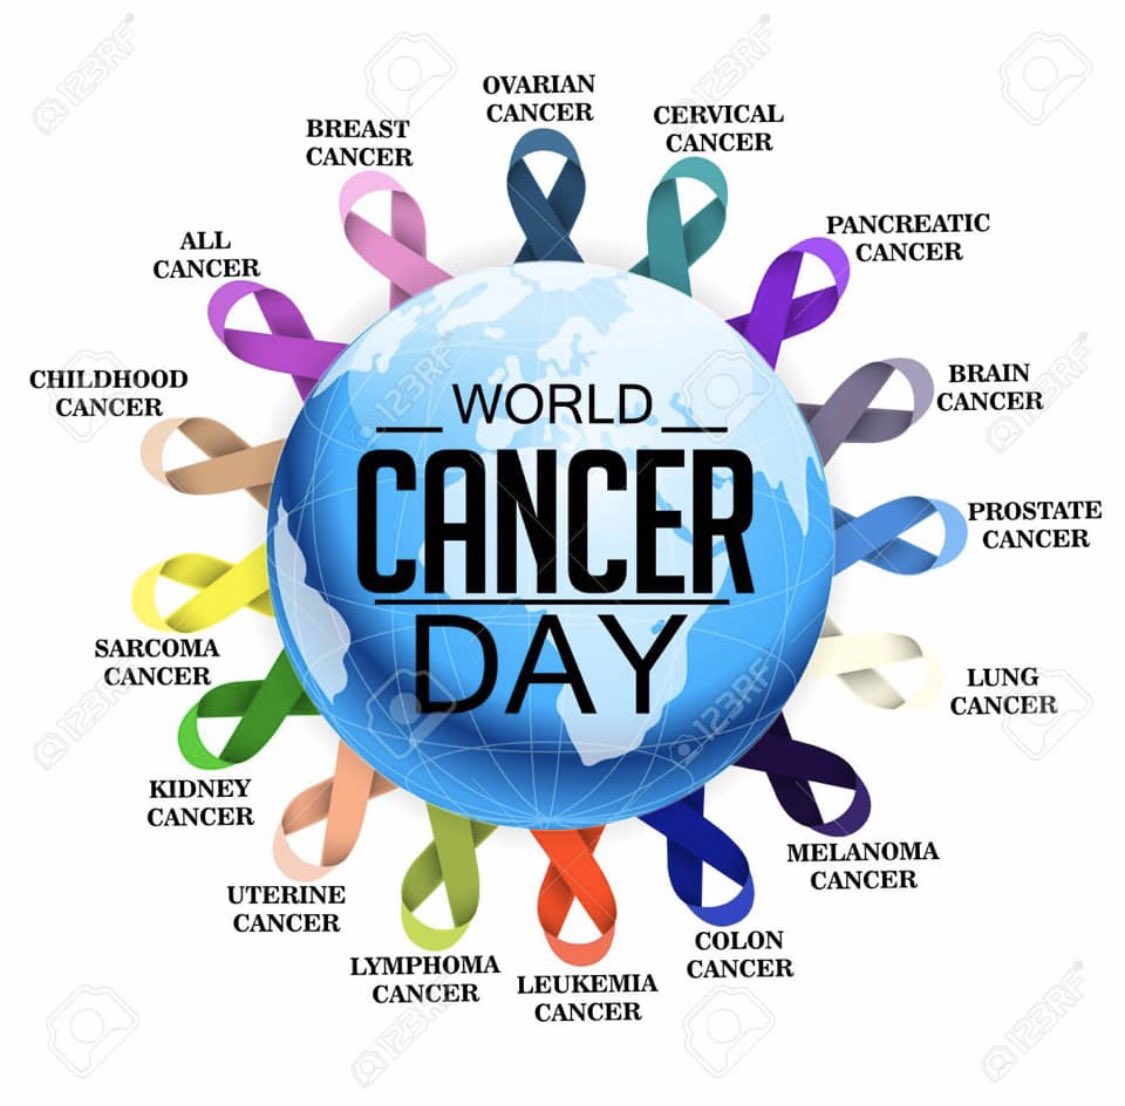 I pray everyday that we may one day find a cure for all of these cancers. #worldcancerday #fightcancersworldwide #bepositive #nevergiveup